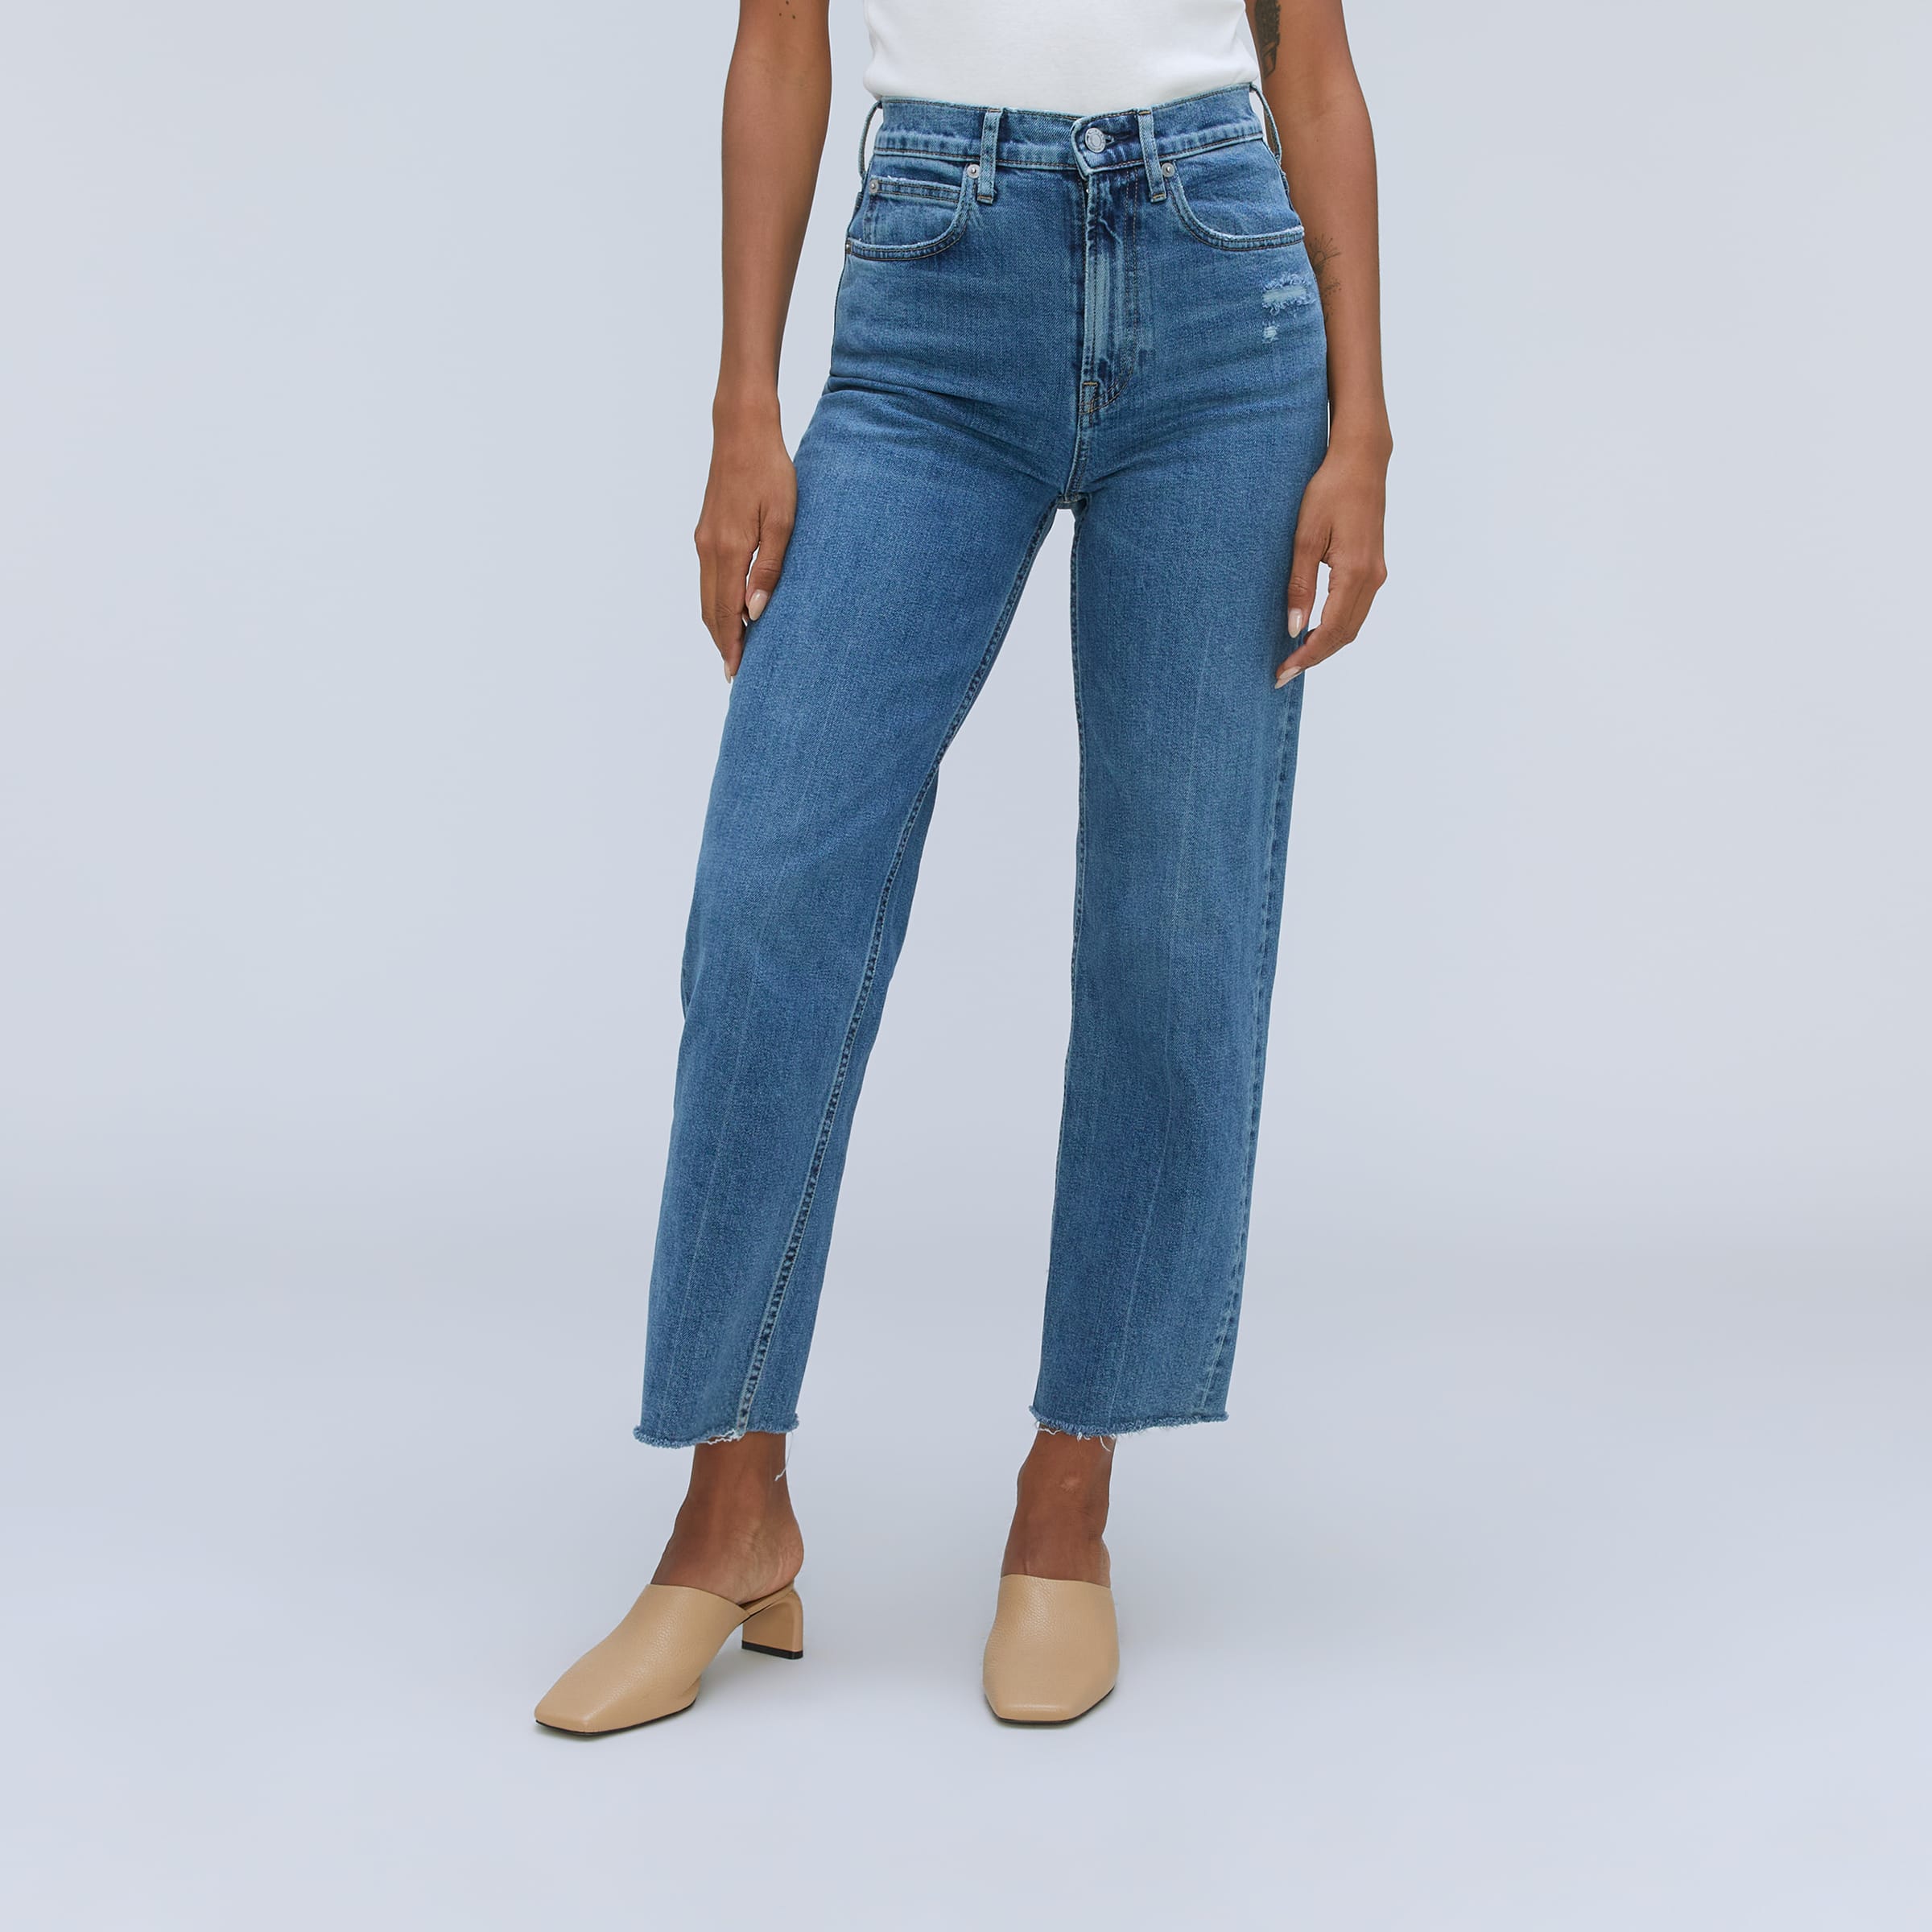 The Way-High® Jean Distressed – Everlane